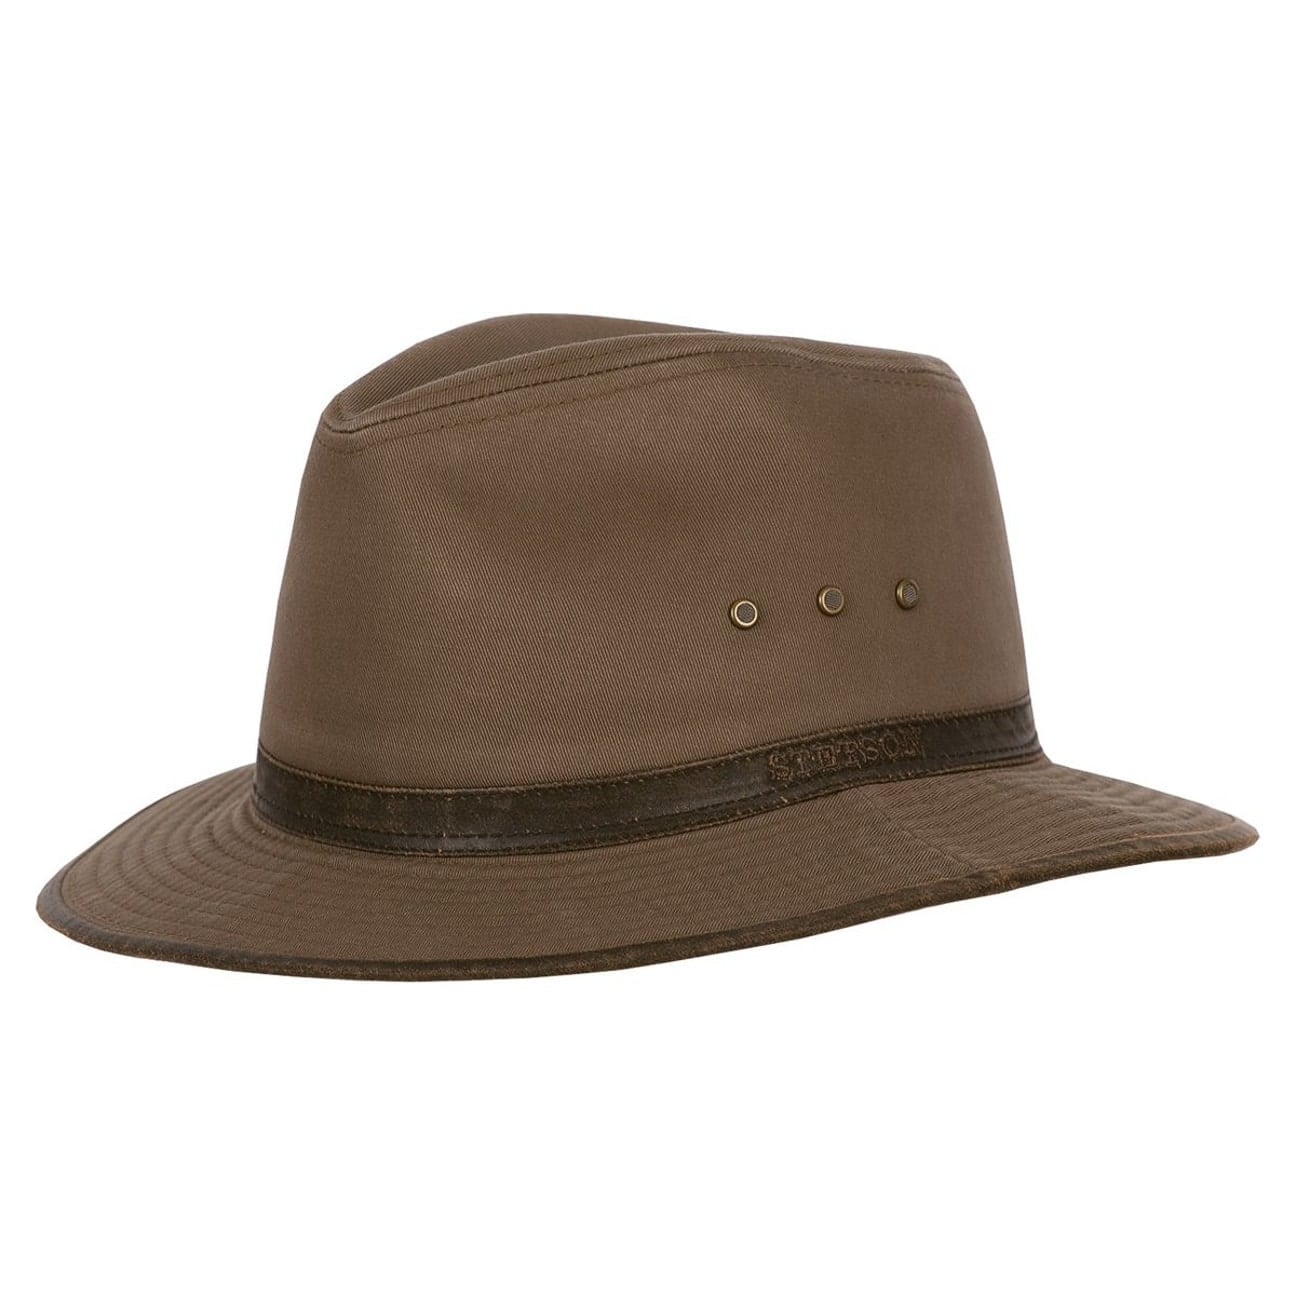 Ava Cotton Outdoor Hat by Stetson - 59,00